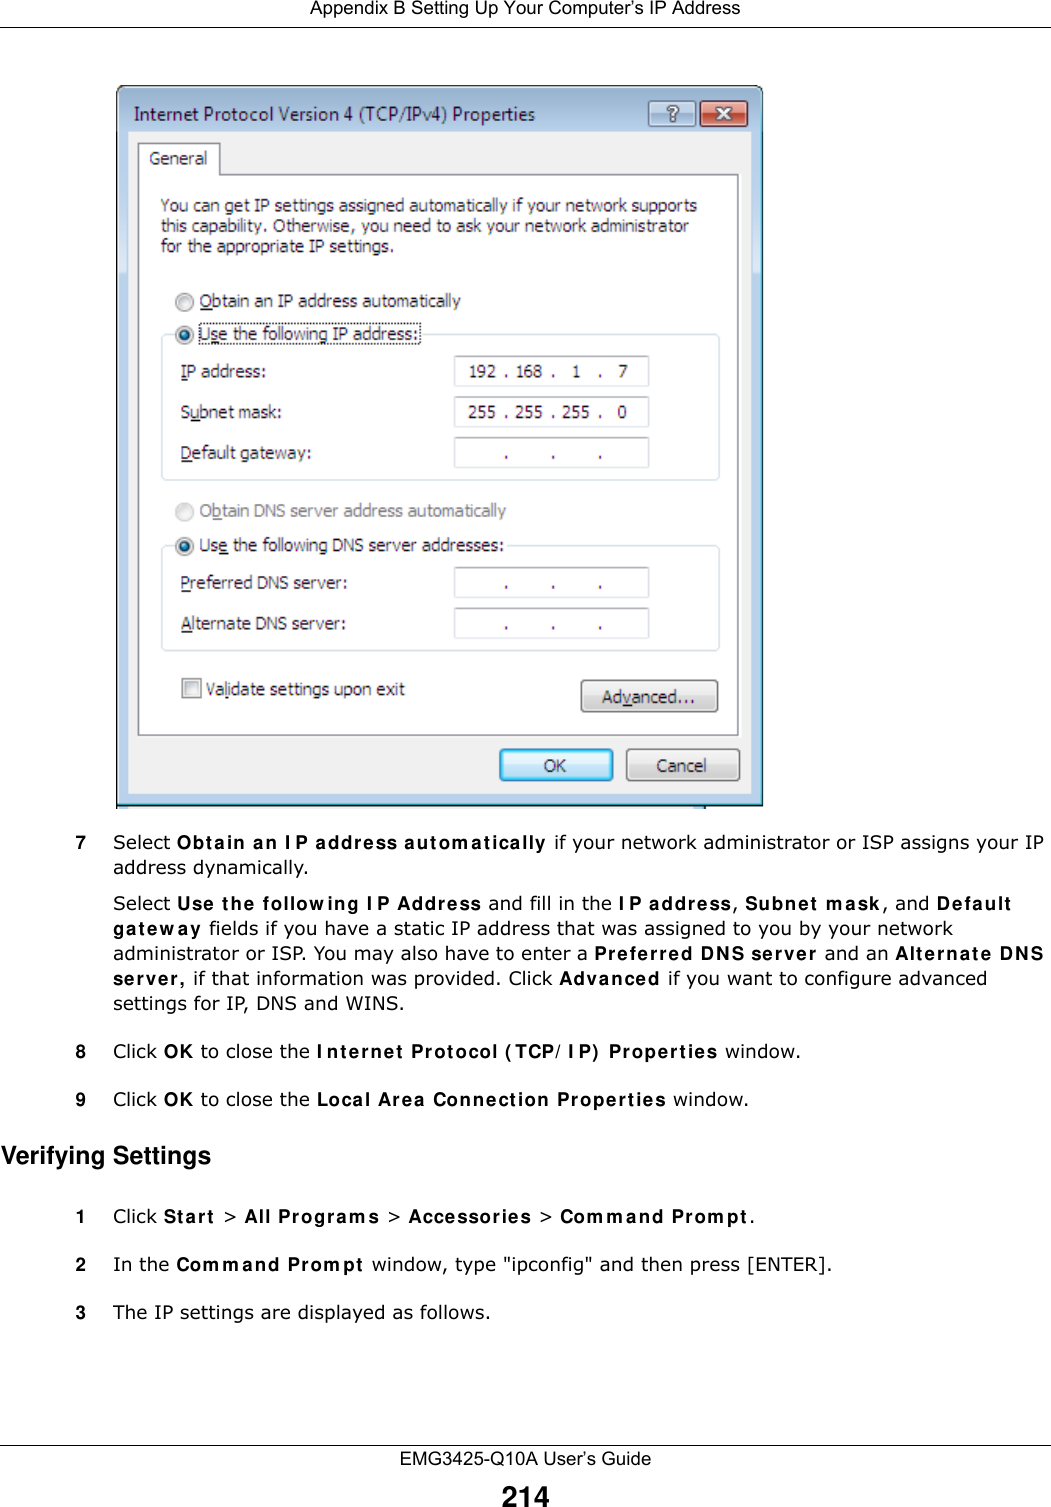 Appendix B Setting Up Your Computer’s IP AddressEMG3425-Q10A User’s Guide2147Select Obt a in a n I P a ddre ss a ut om a t ically if your network administrator or ISP assigns your IP address dynamically.Select Use t he follow ing I P Addr ess and fill in the I P address, Subne t  m a sk , and D efault  ga t e w a y  fields if you have a static IP address that was assigned to you by your network administrator or ISP. You may also have to enter a Pre fer red D N S se r ve r and an Alt e r na t e  DNS server, if that information was provided. Click Adva nced if you want to configure advanced settings for IP, DNS and WINS. 8Click OK to close the I nt ernet  Protocol ( TCP/ I P)  Pr ope rtie s window.9Click OK to close the Loca l Ar ea Connect ion Pr ope rtie s window.Verifying Settings1Click St a rt  &gt; All Progra m s &gt; Acce ssories &gt; Com m an d Prom pt .2In the Com m and Prom pt  window, type &quot;ipconfig&quot; and then press [ENTER]. 3The IP settings are displayed as follows.